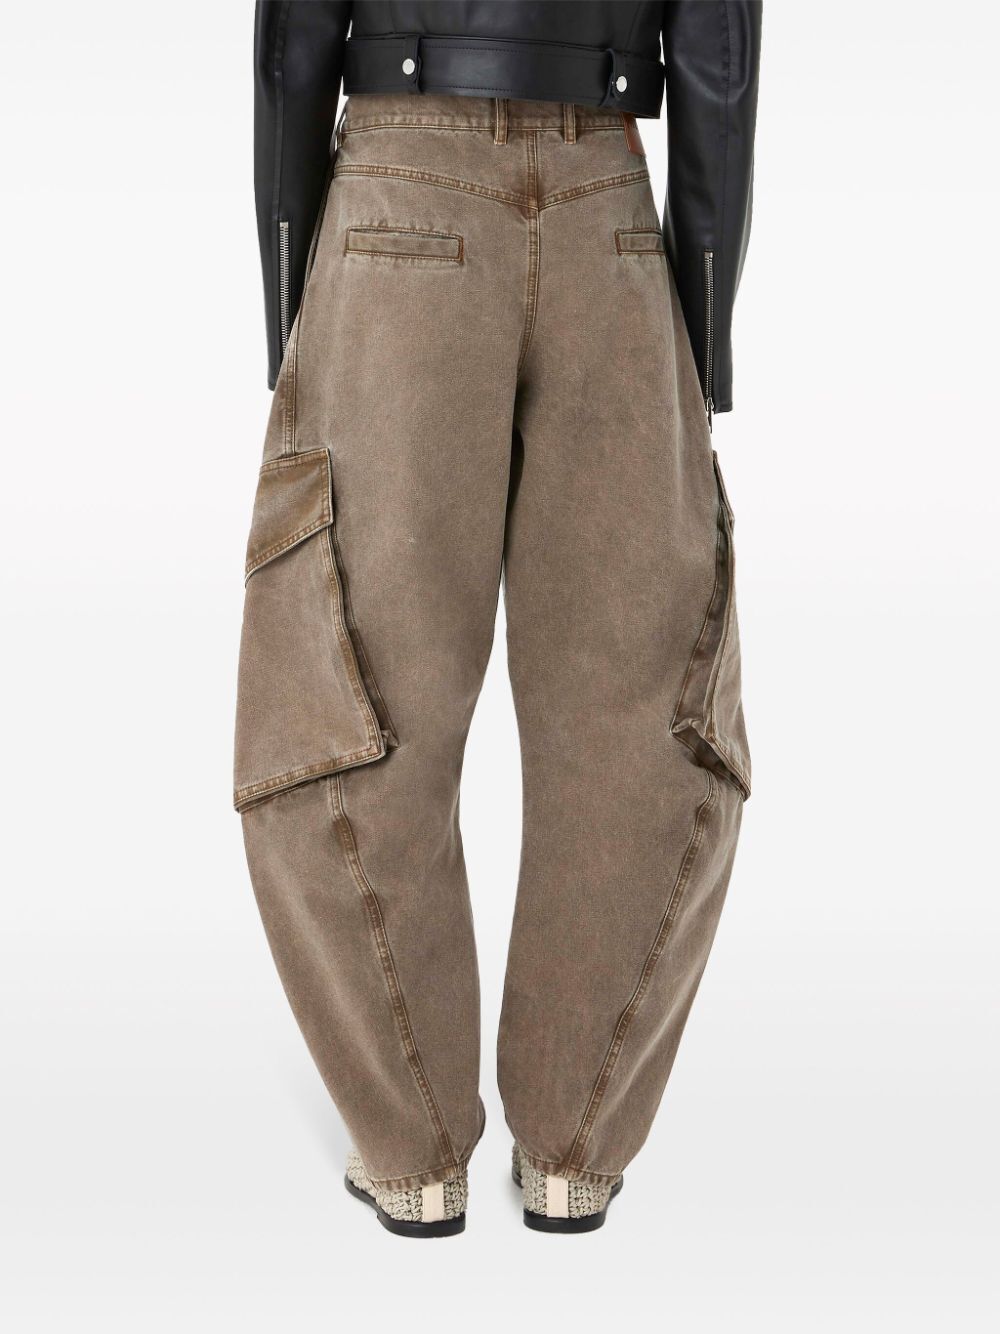 JW ANDERSON-TWISTED CARGO TROUSERS-TR0346 PG1476 575